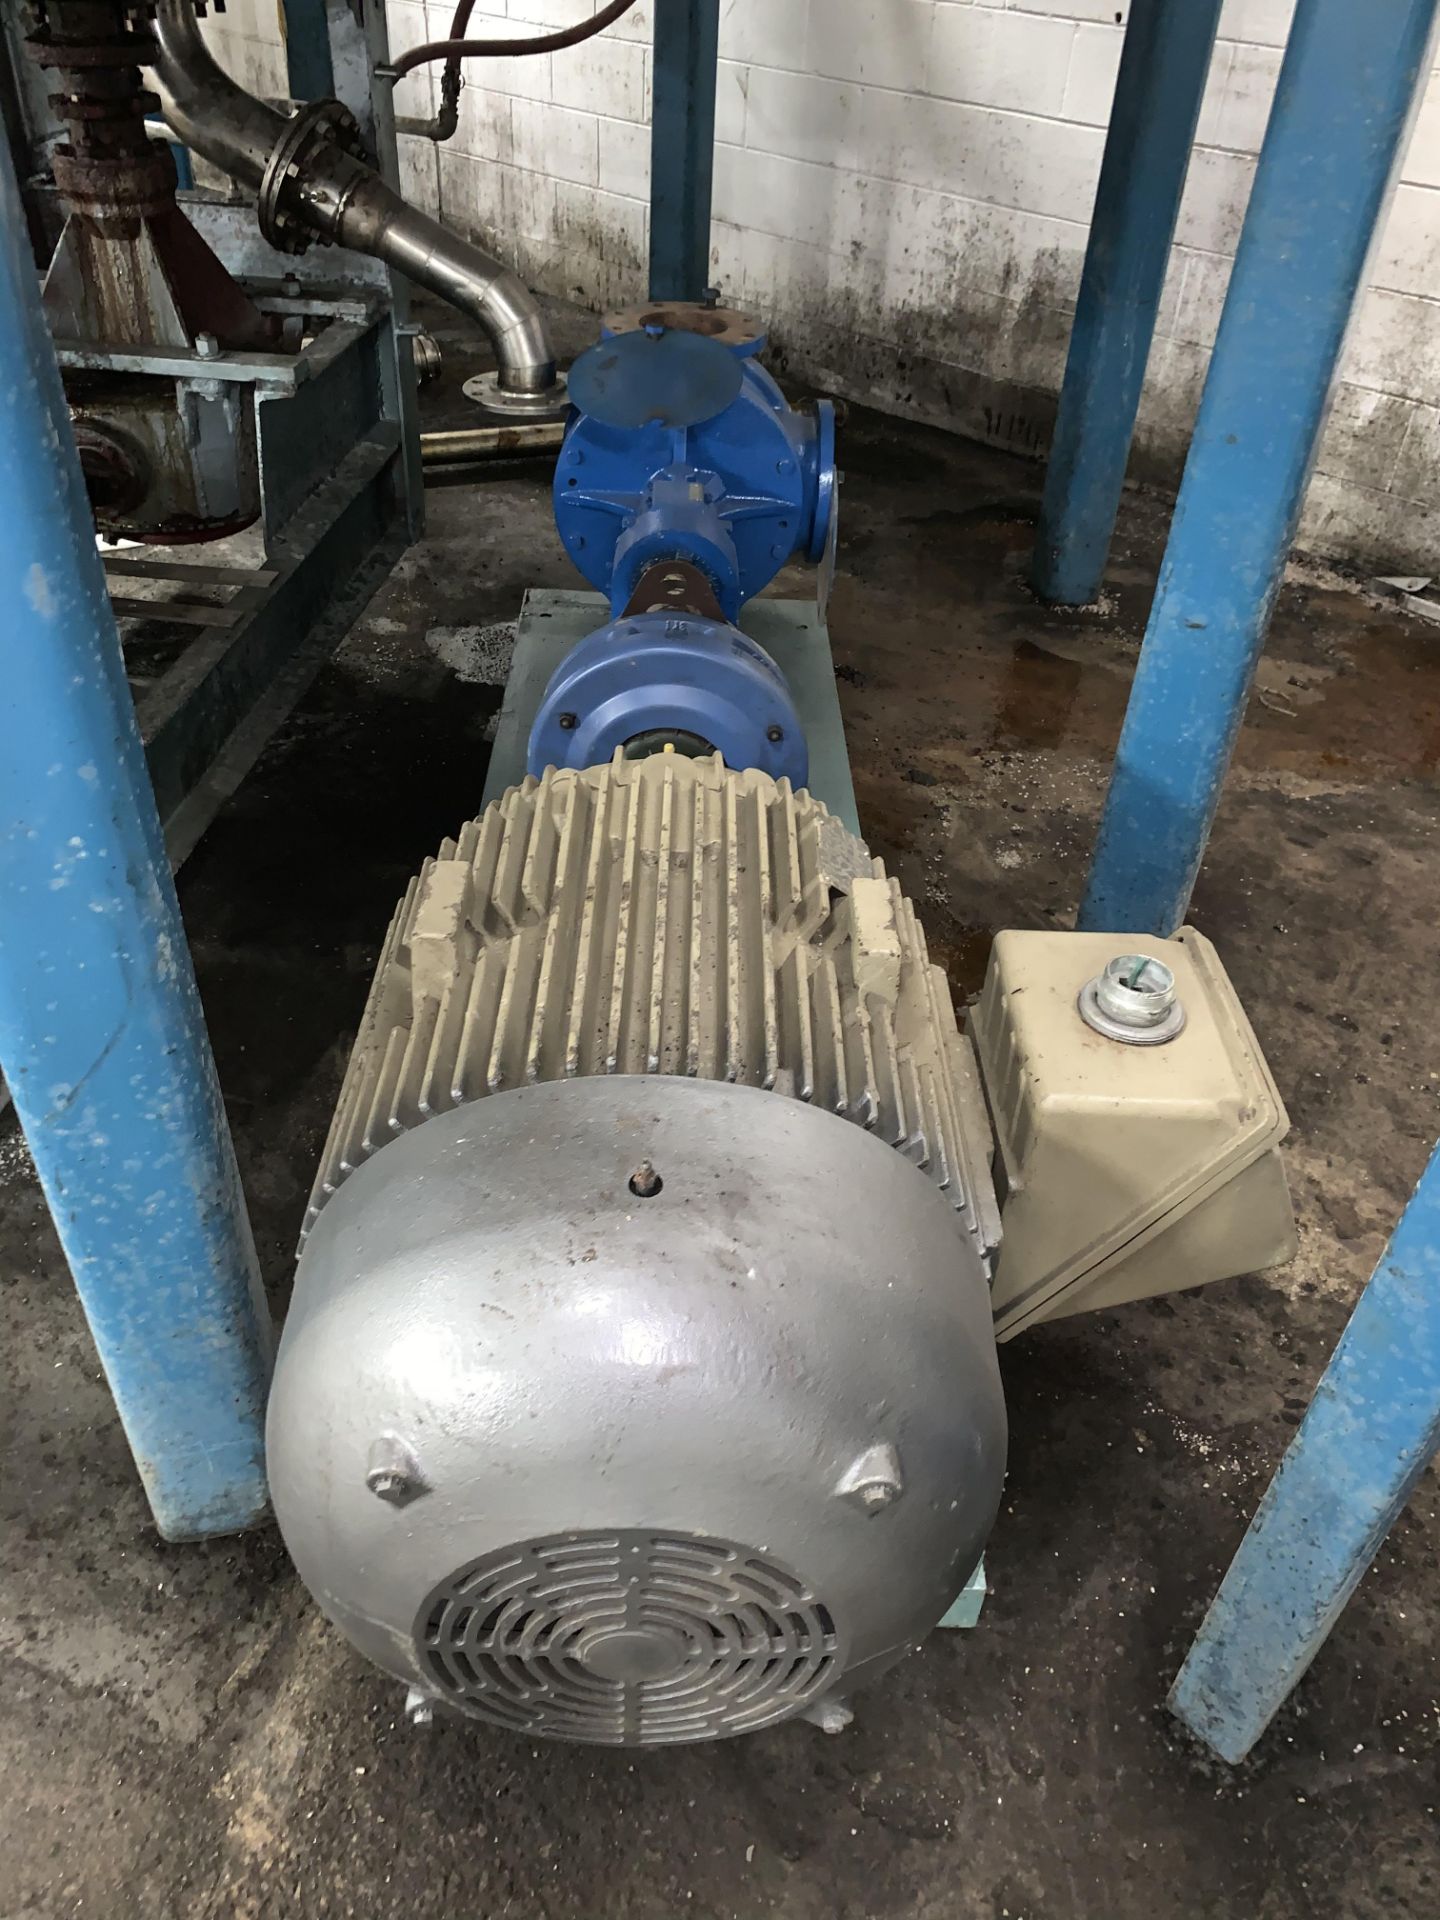 Viking Pump, 6" Inlet/Outlet, ModelM-125, Serial #10850336 with 60HP GE electric motor, 460V, 1750 - Image 2 of 9